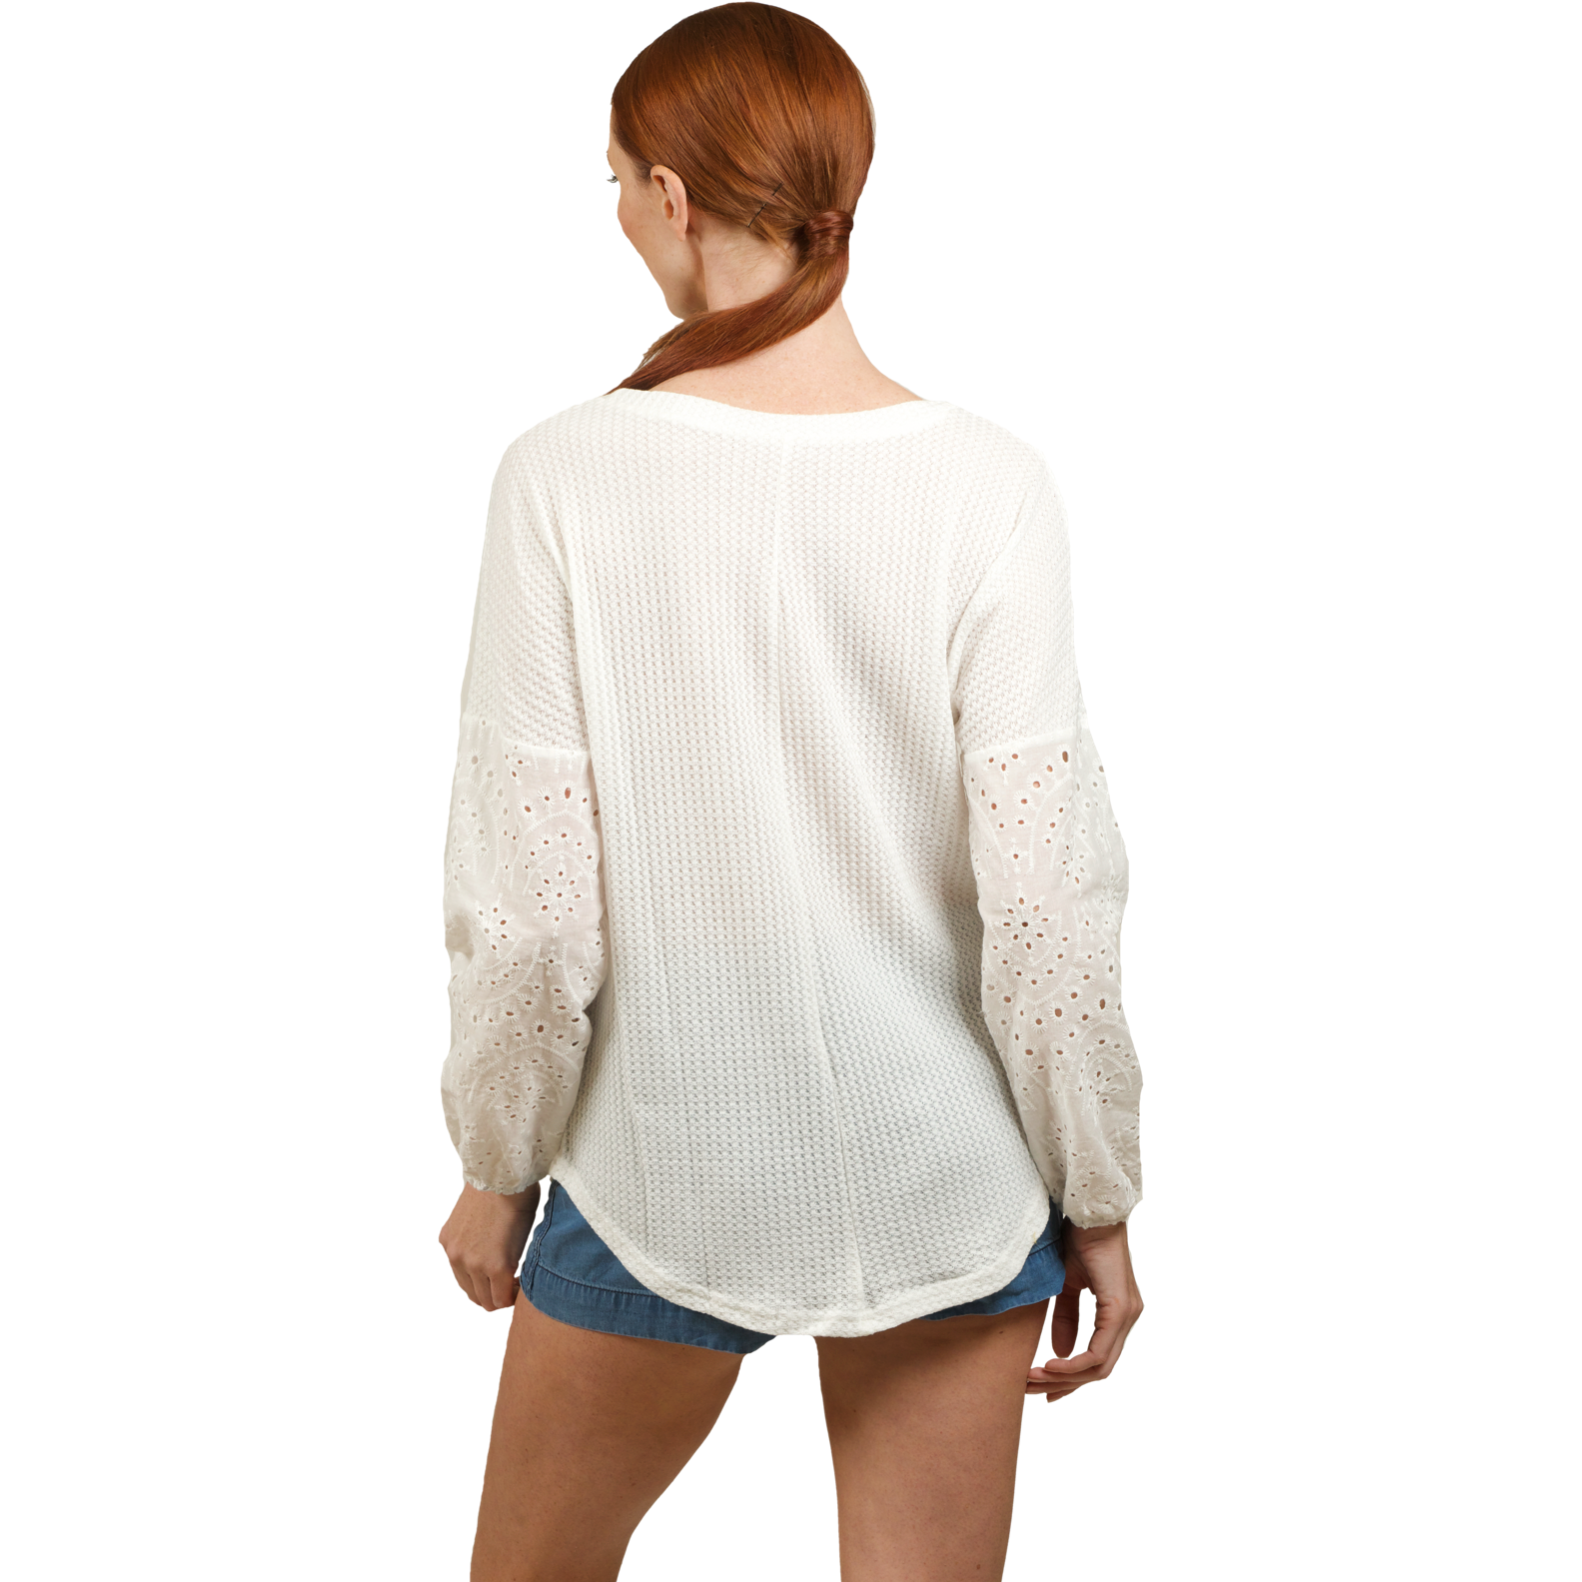 Patty Thermal W/ Eyelet Contrast